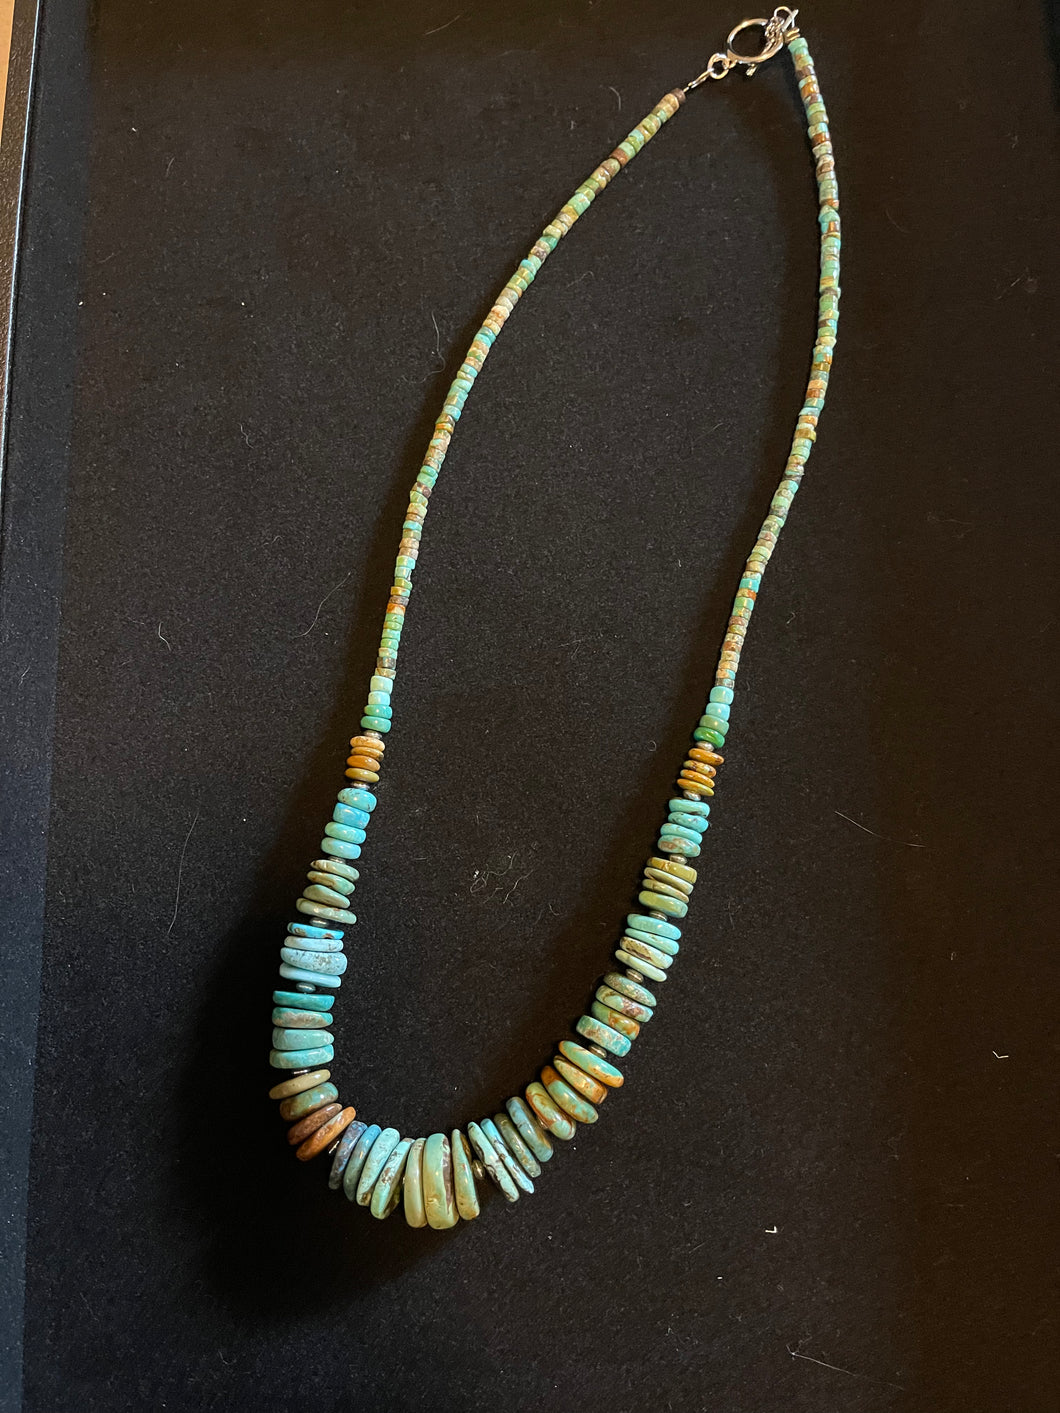 22 Inch Necklace  Graduated Turquoise Necklace  - Tri-color